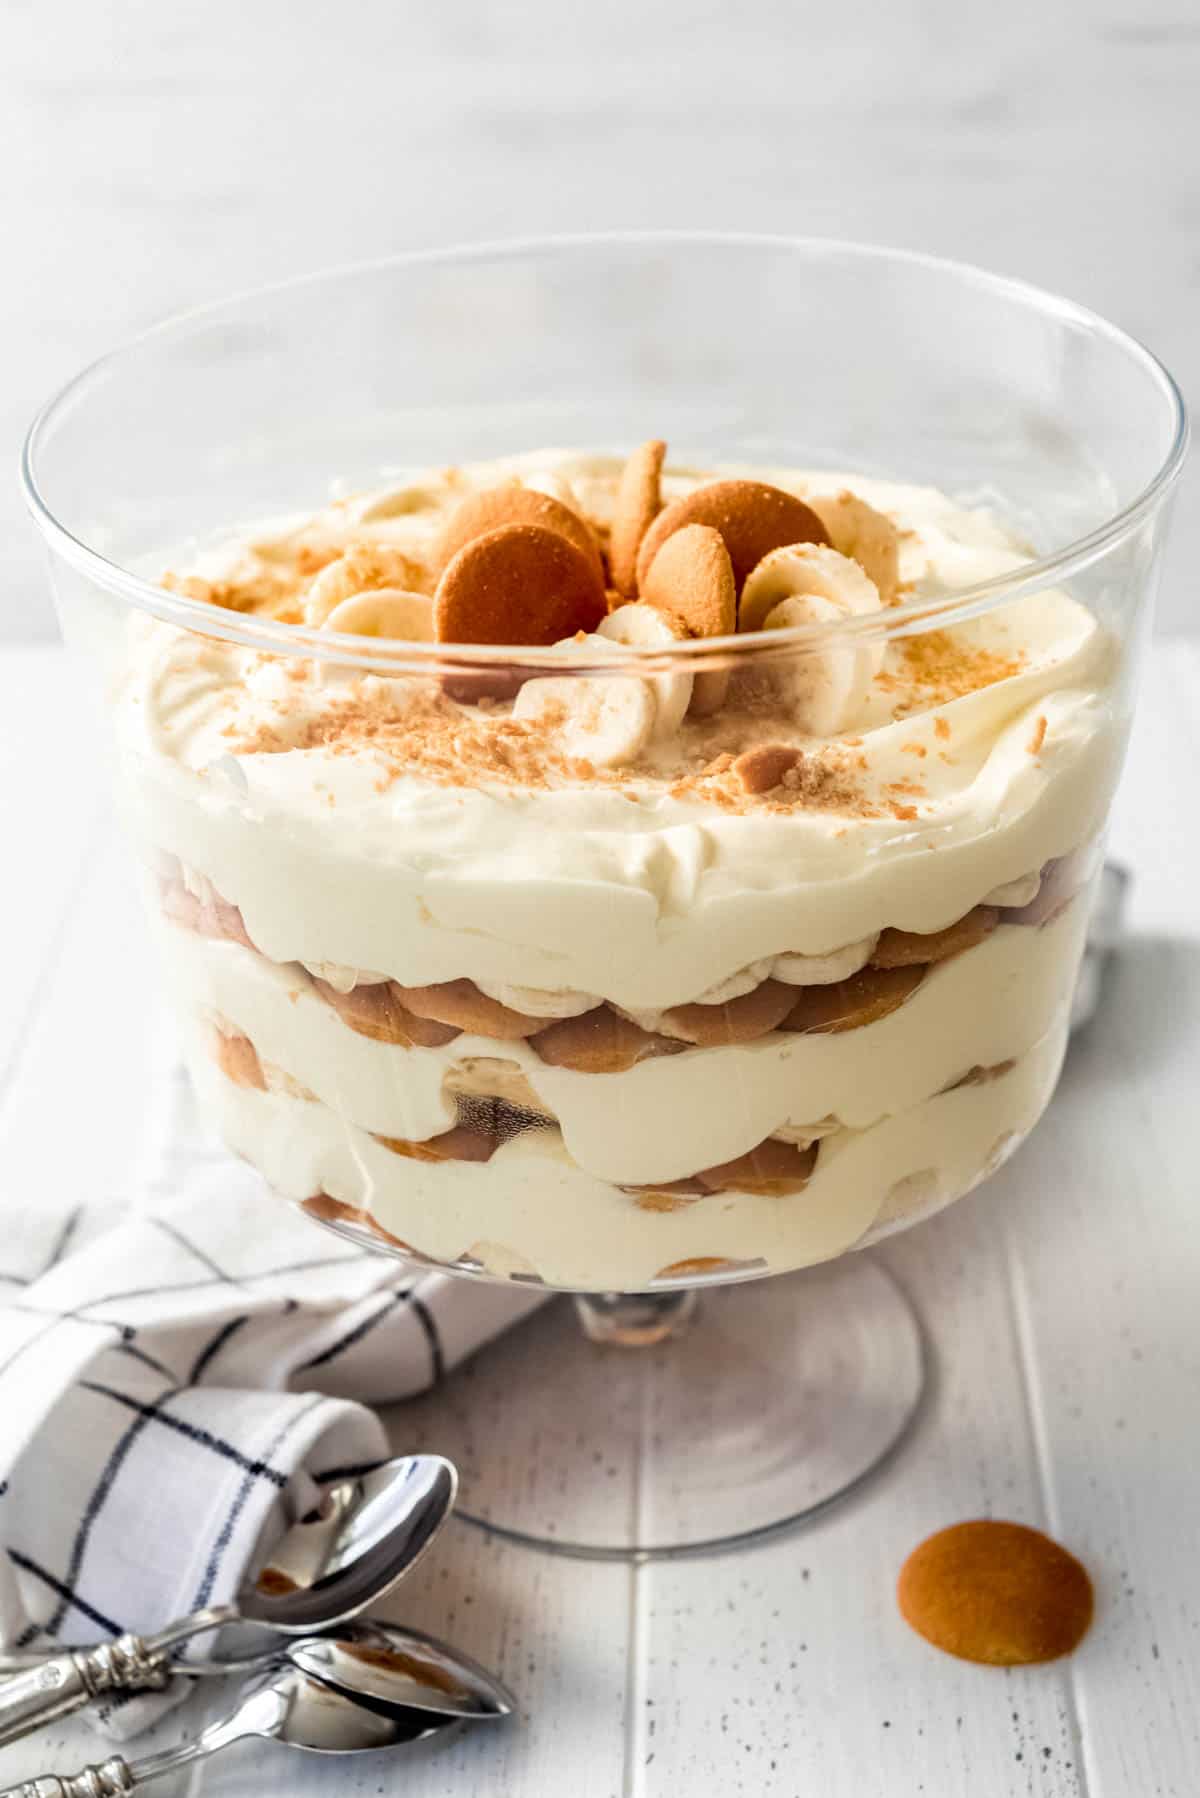 Magnolia Bakery Banana Pudding layered in a trifle dish on a white table with a dish towel and a serving spoon